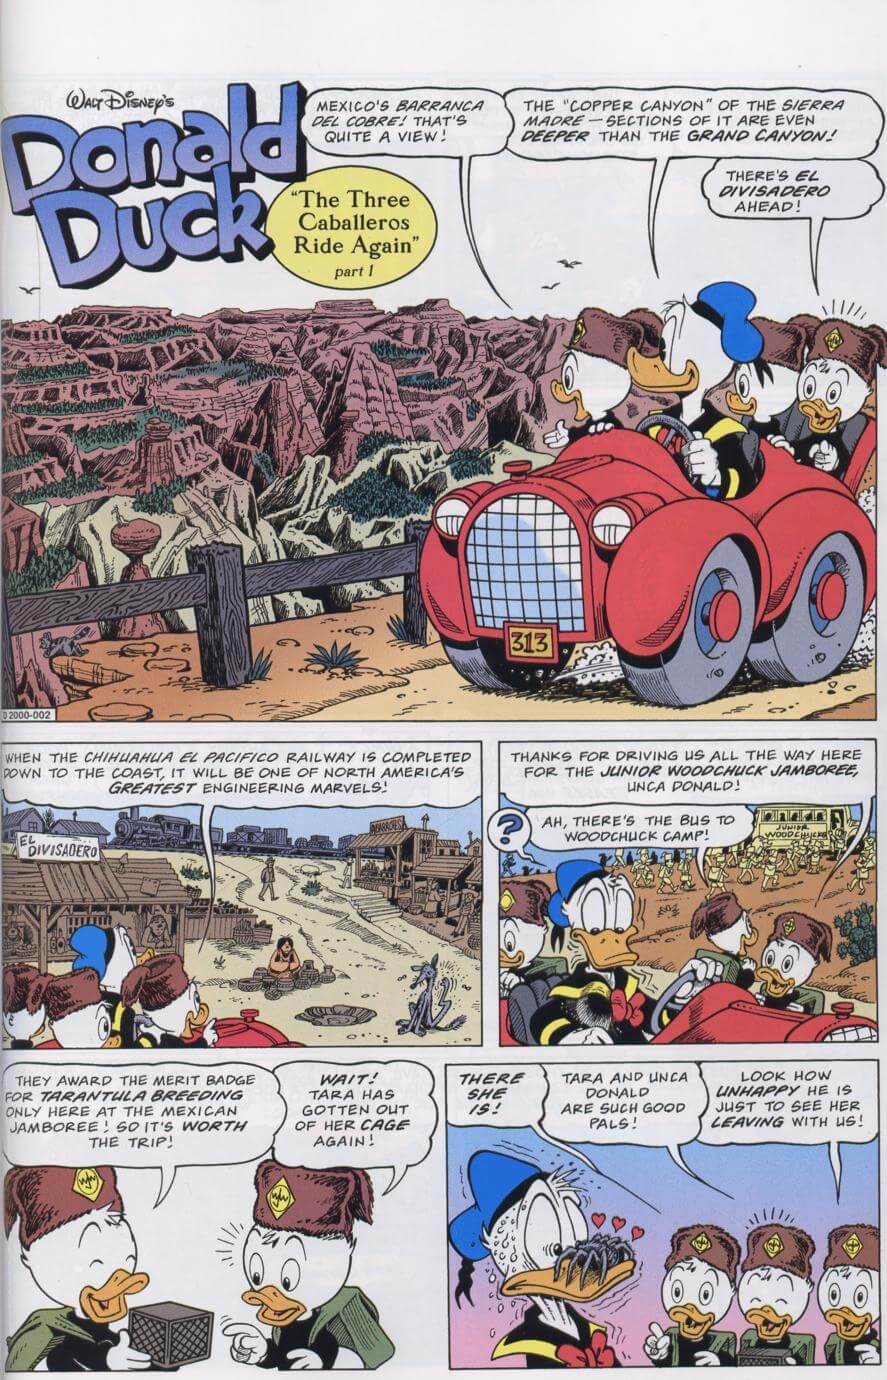 The Three Caballeros Ride Again first page